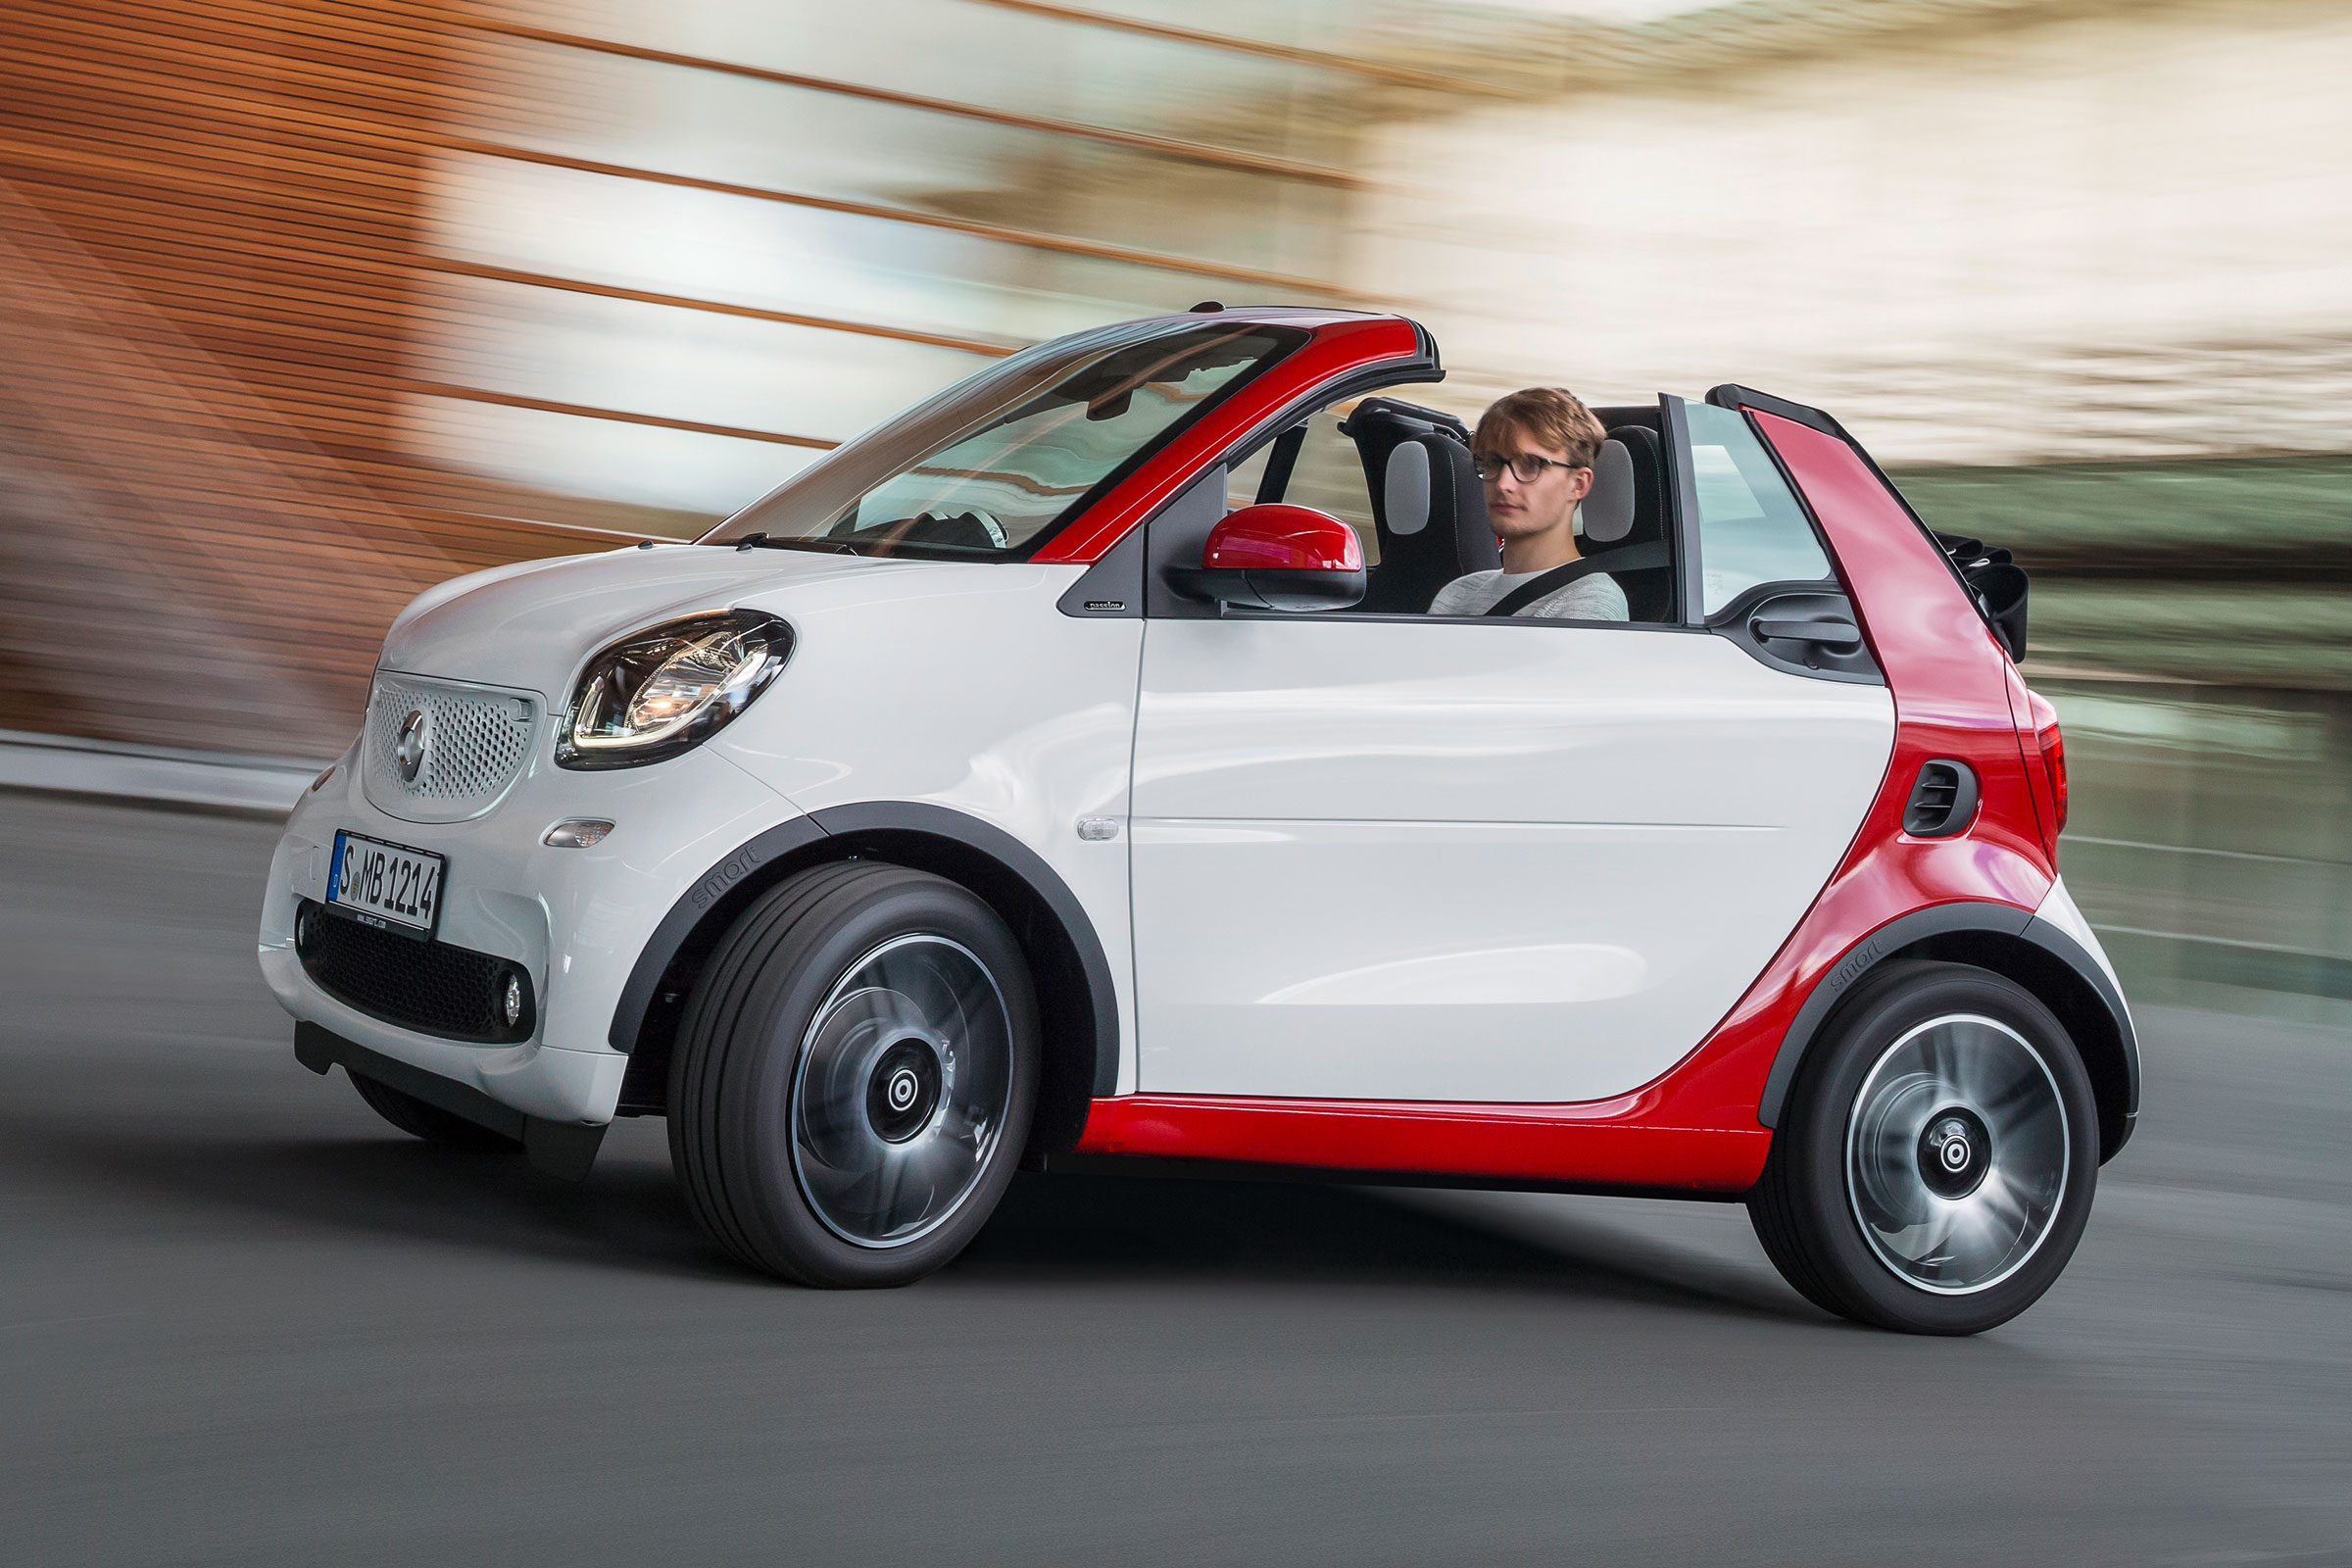 New Smart ForTwo cabrio Prices, specs and release date Carbuyer